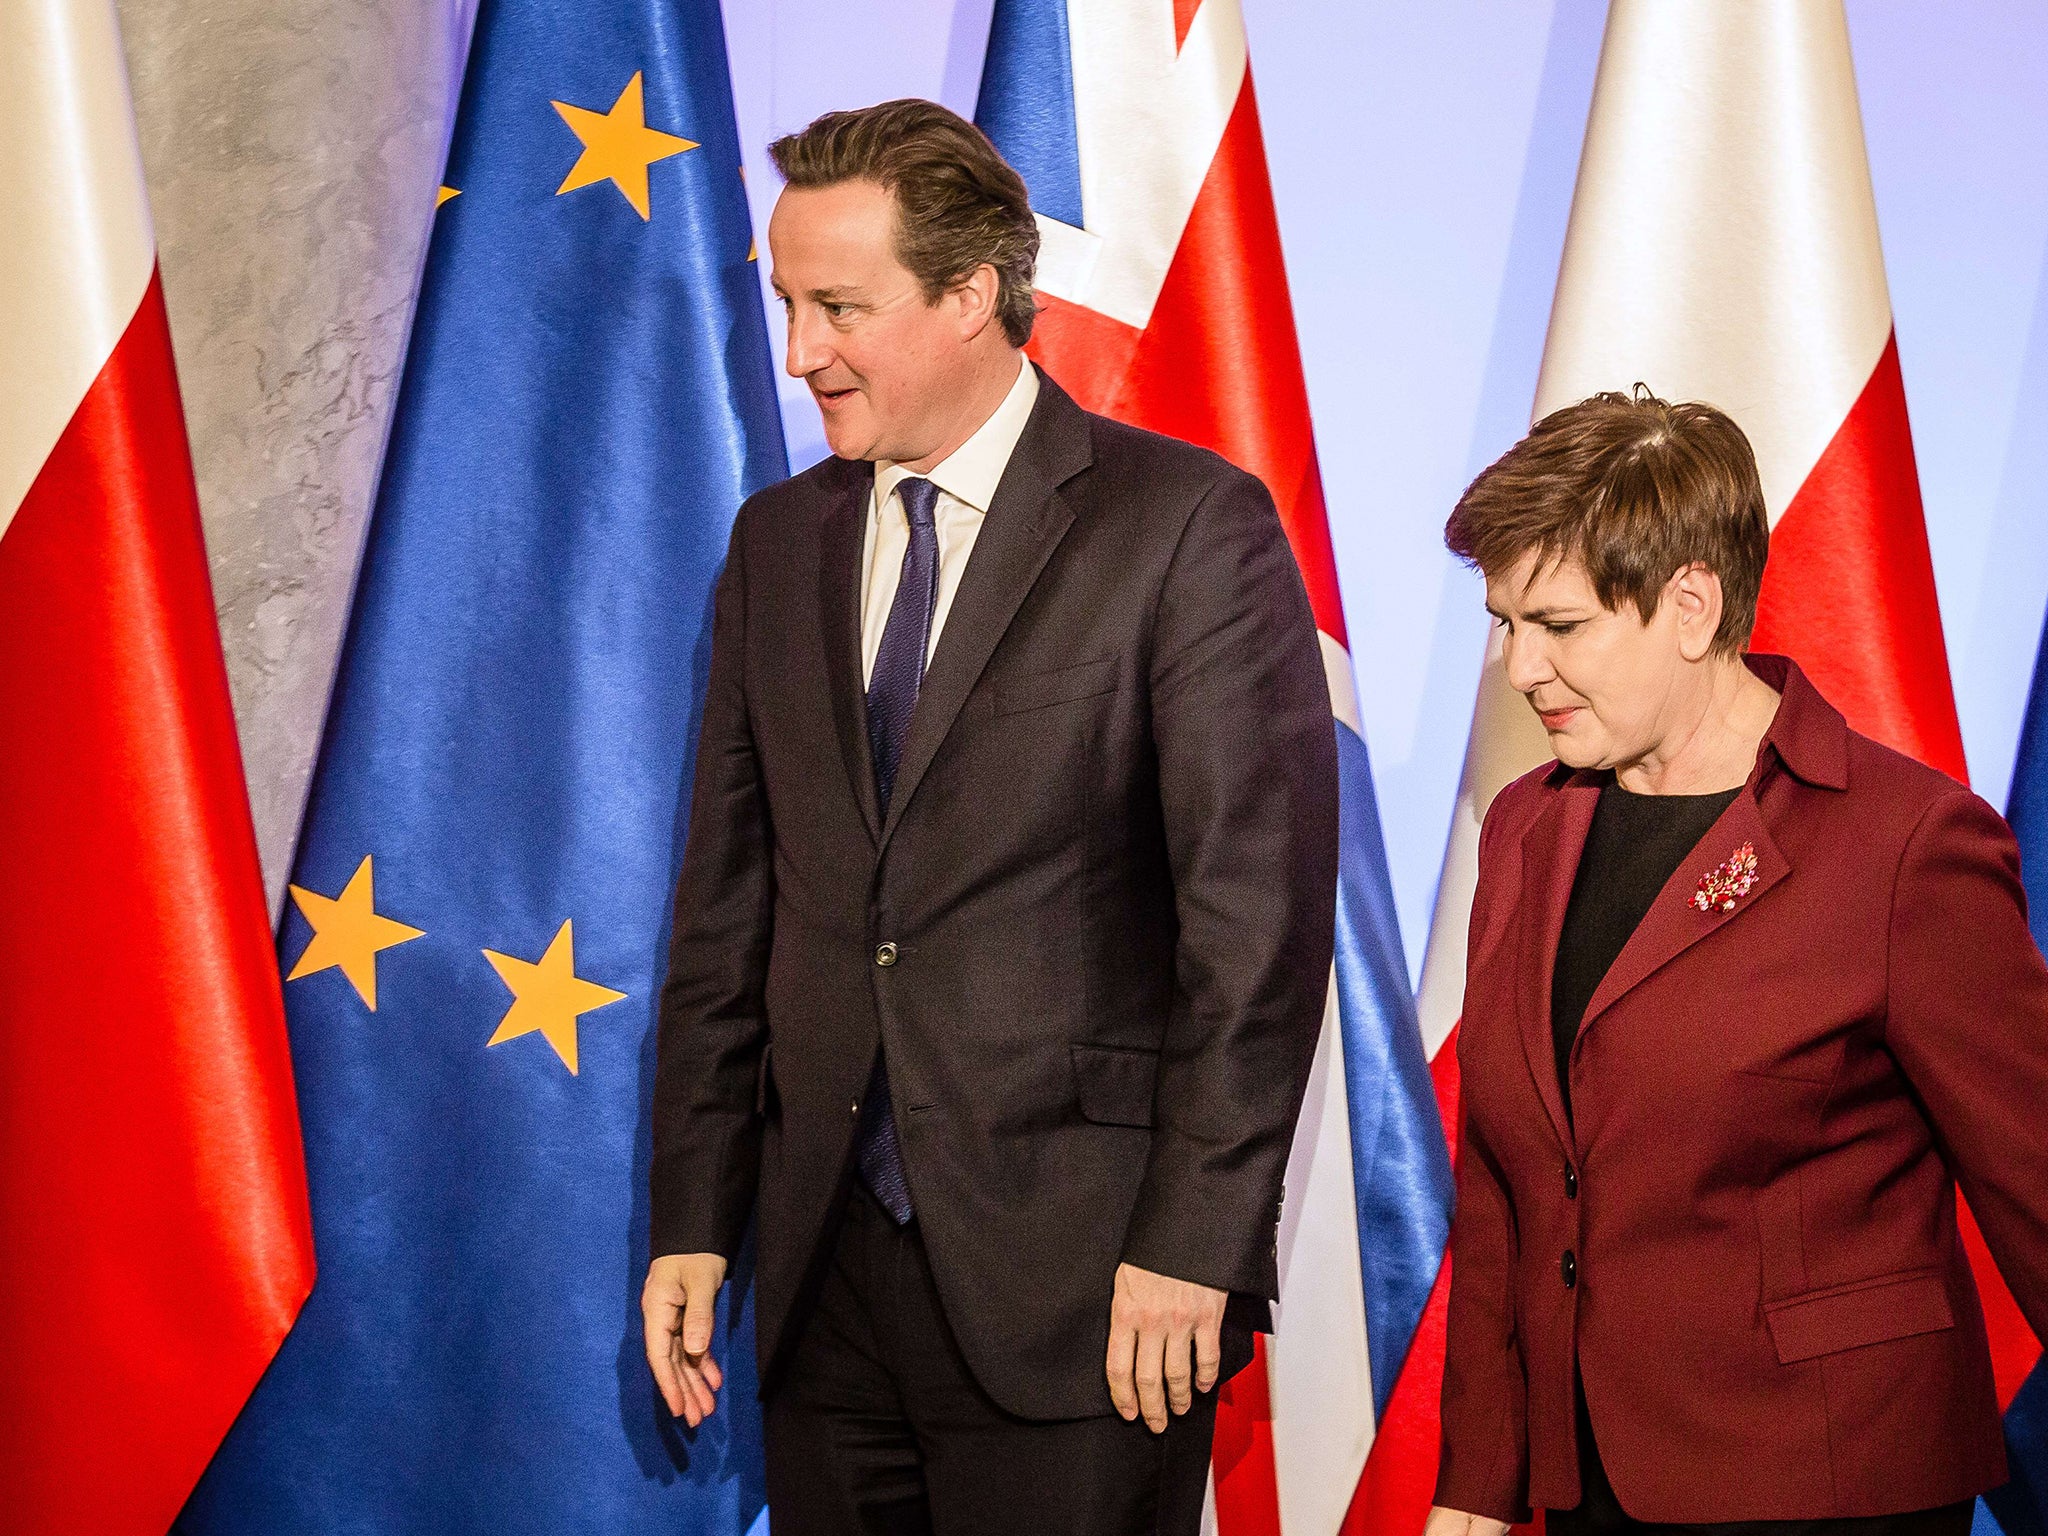 British Prime Minister David Cameron is followed by Polish counterpart Beata Szydlo (R) during an official welcoming ceremony at the Polish government building